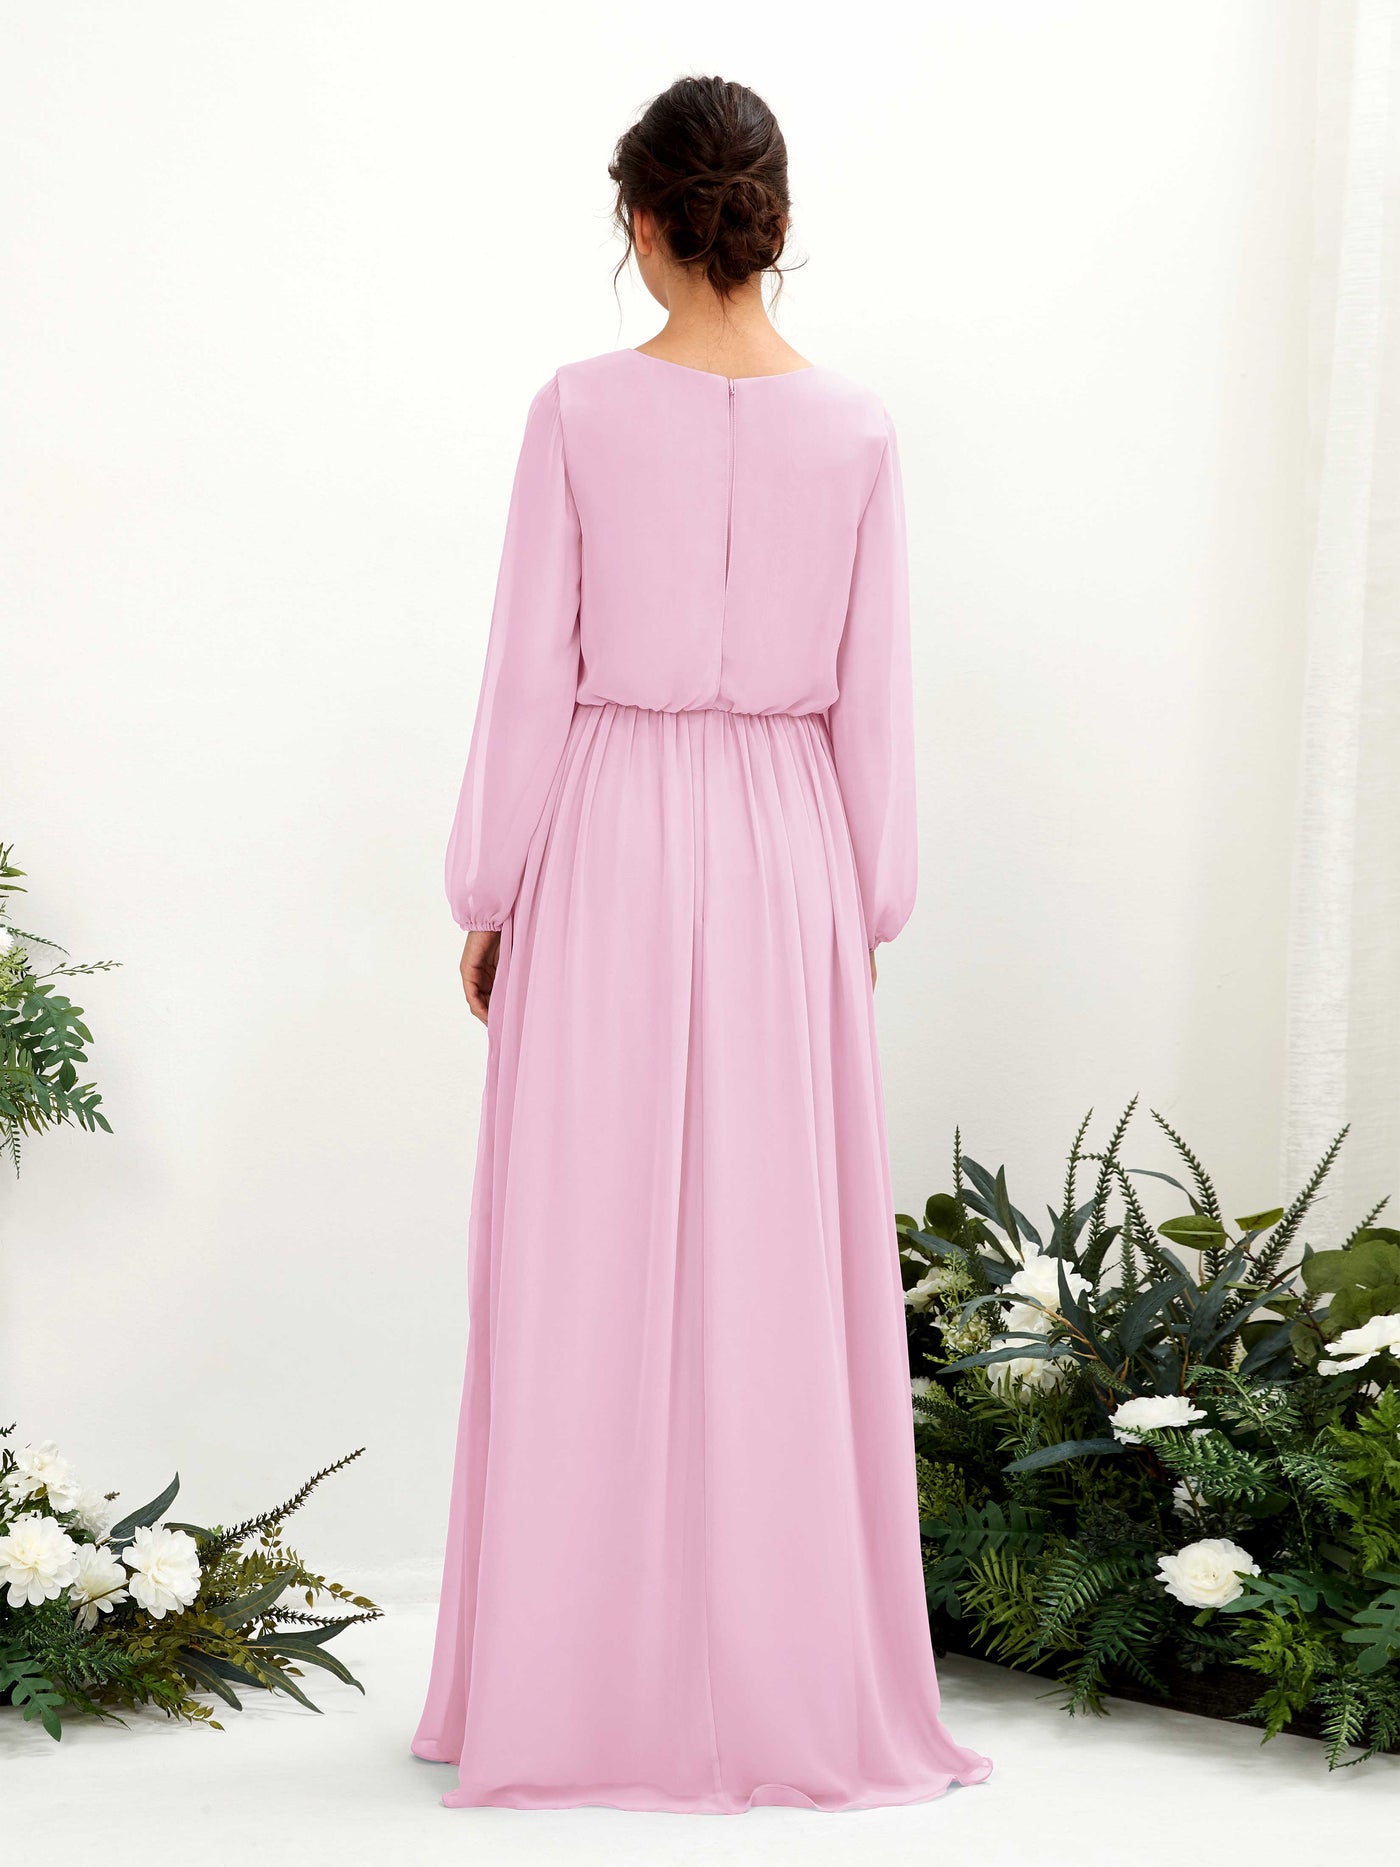 Candy Pink Bridesmaid Dresses Bridesmaid Dress A-line Chiffon V-neck Full Length Long Sleeves Wedding Party Dress (81223839)#color_candy-pink